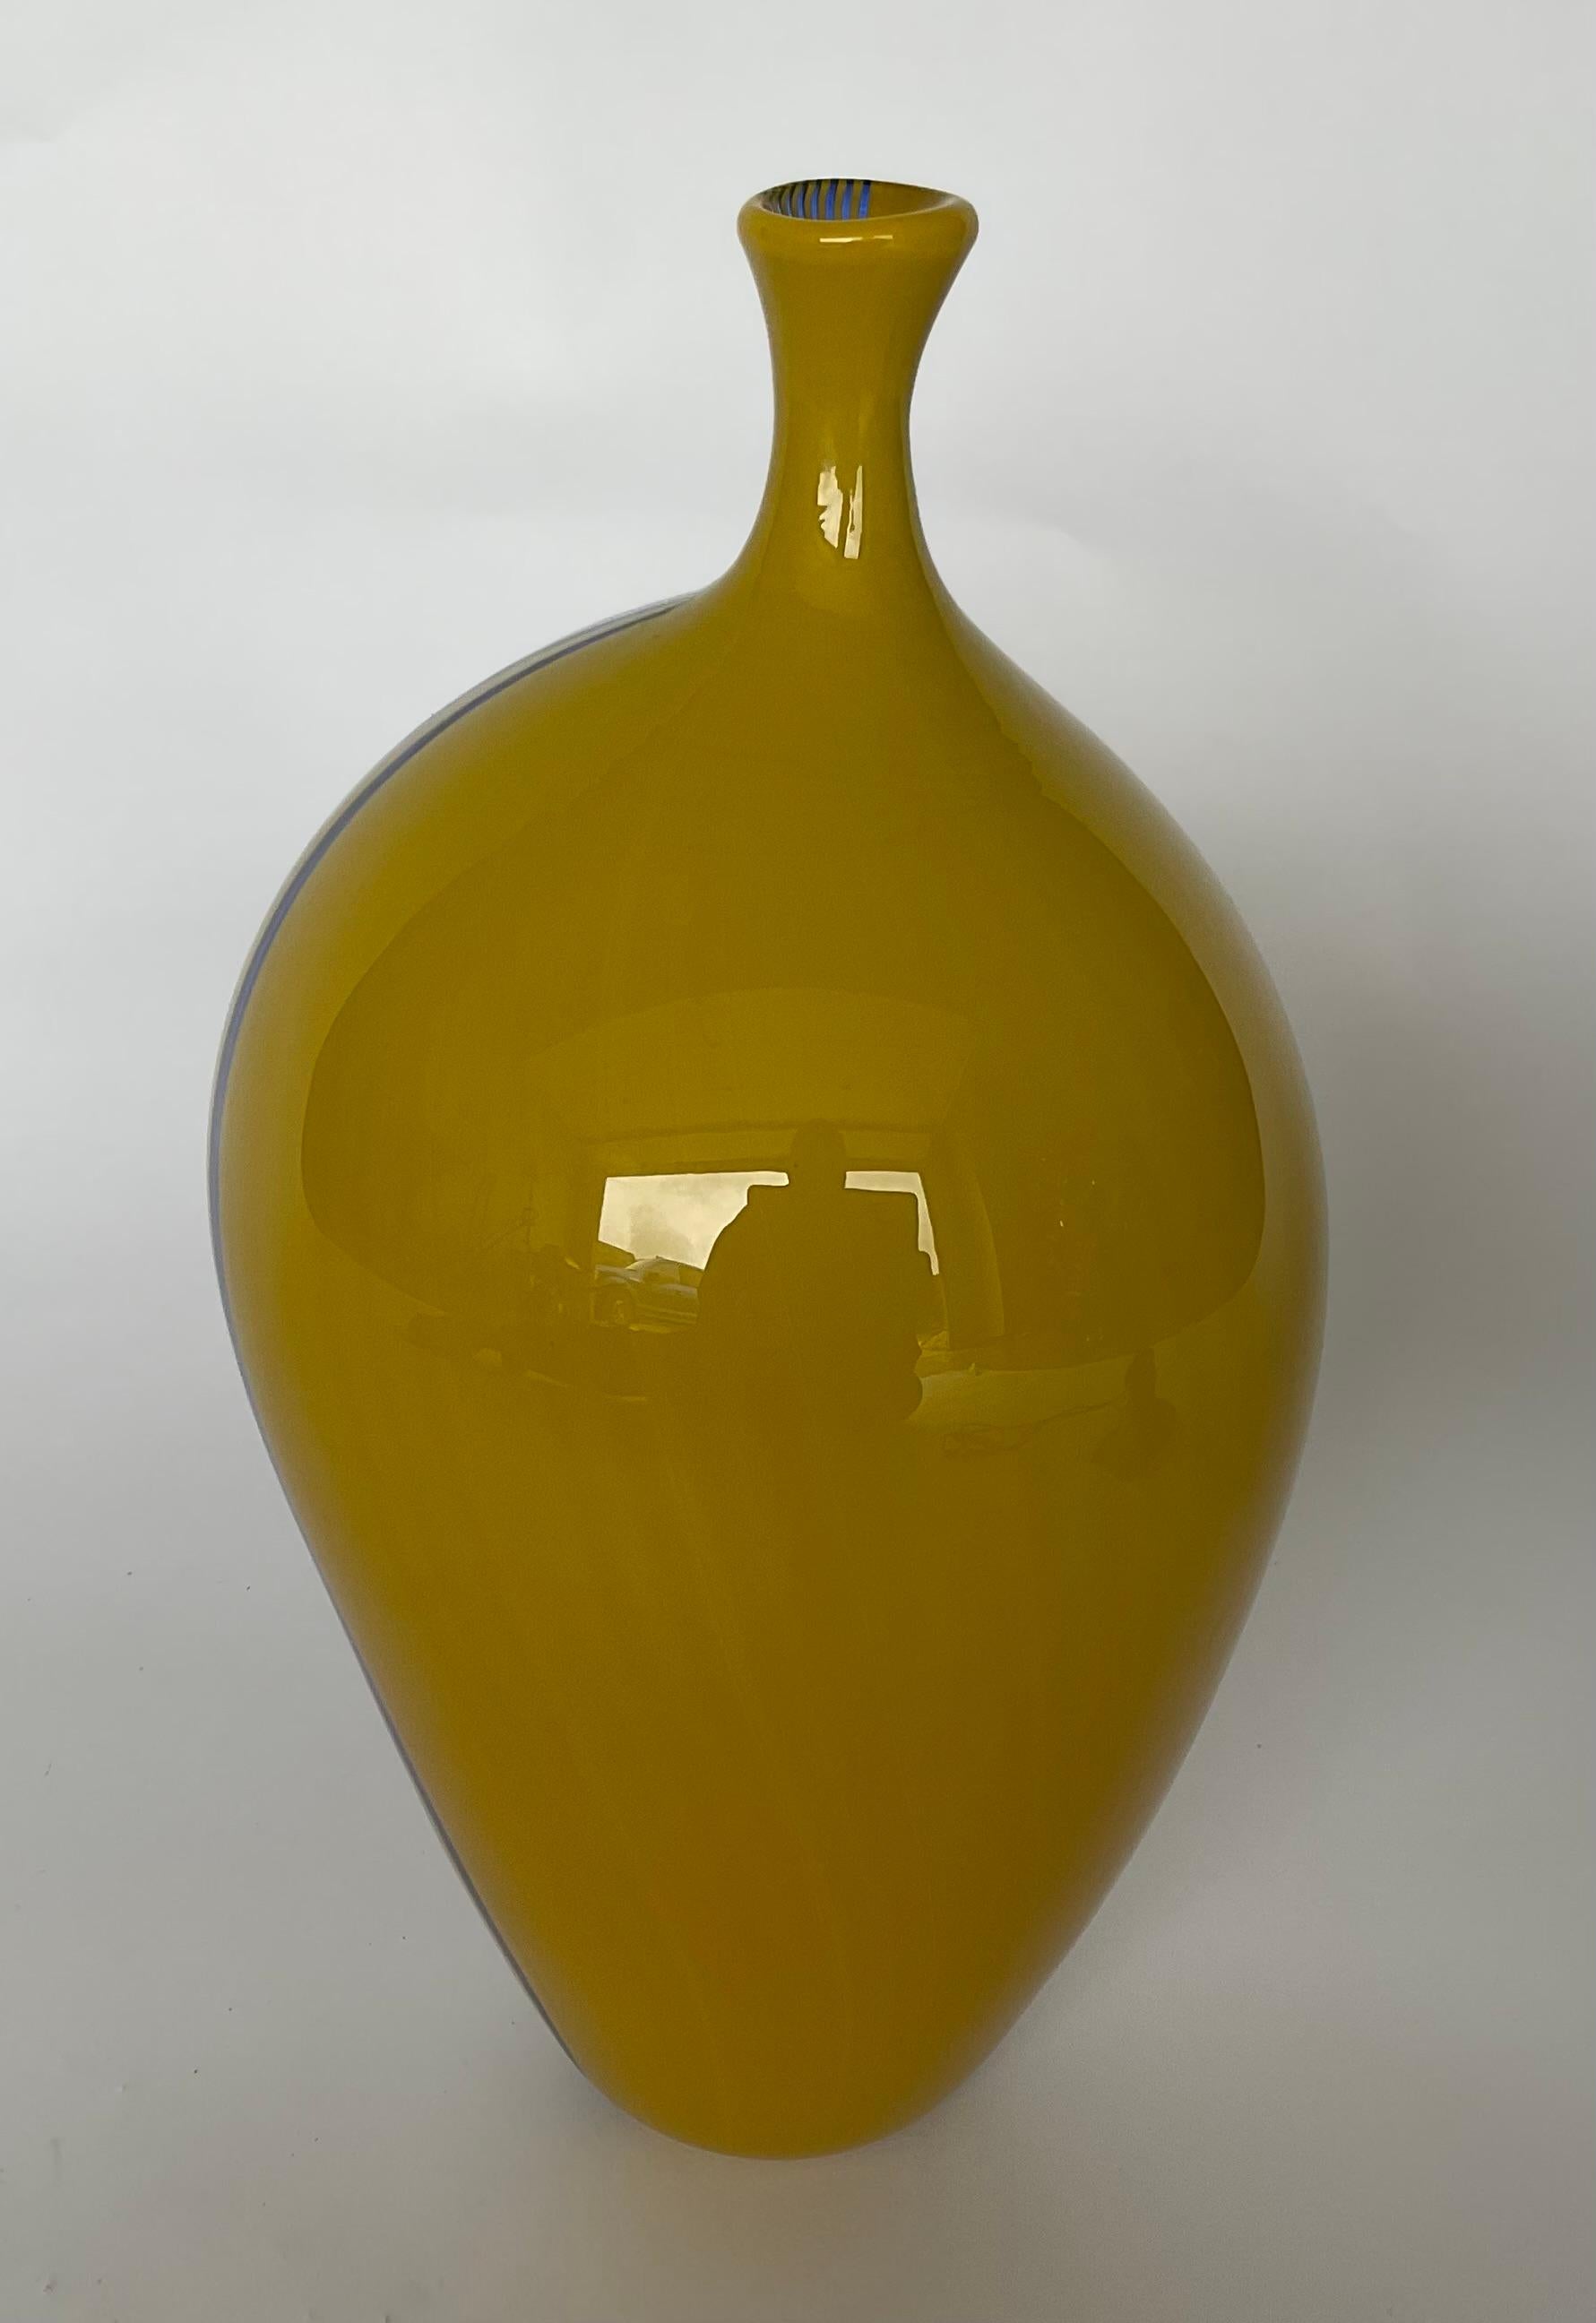 Afro Celotto Artist Signed Studio Murano Art Glass Vase in blue and yellow  In Good Condition For Sale In Ann Arbor, MI